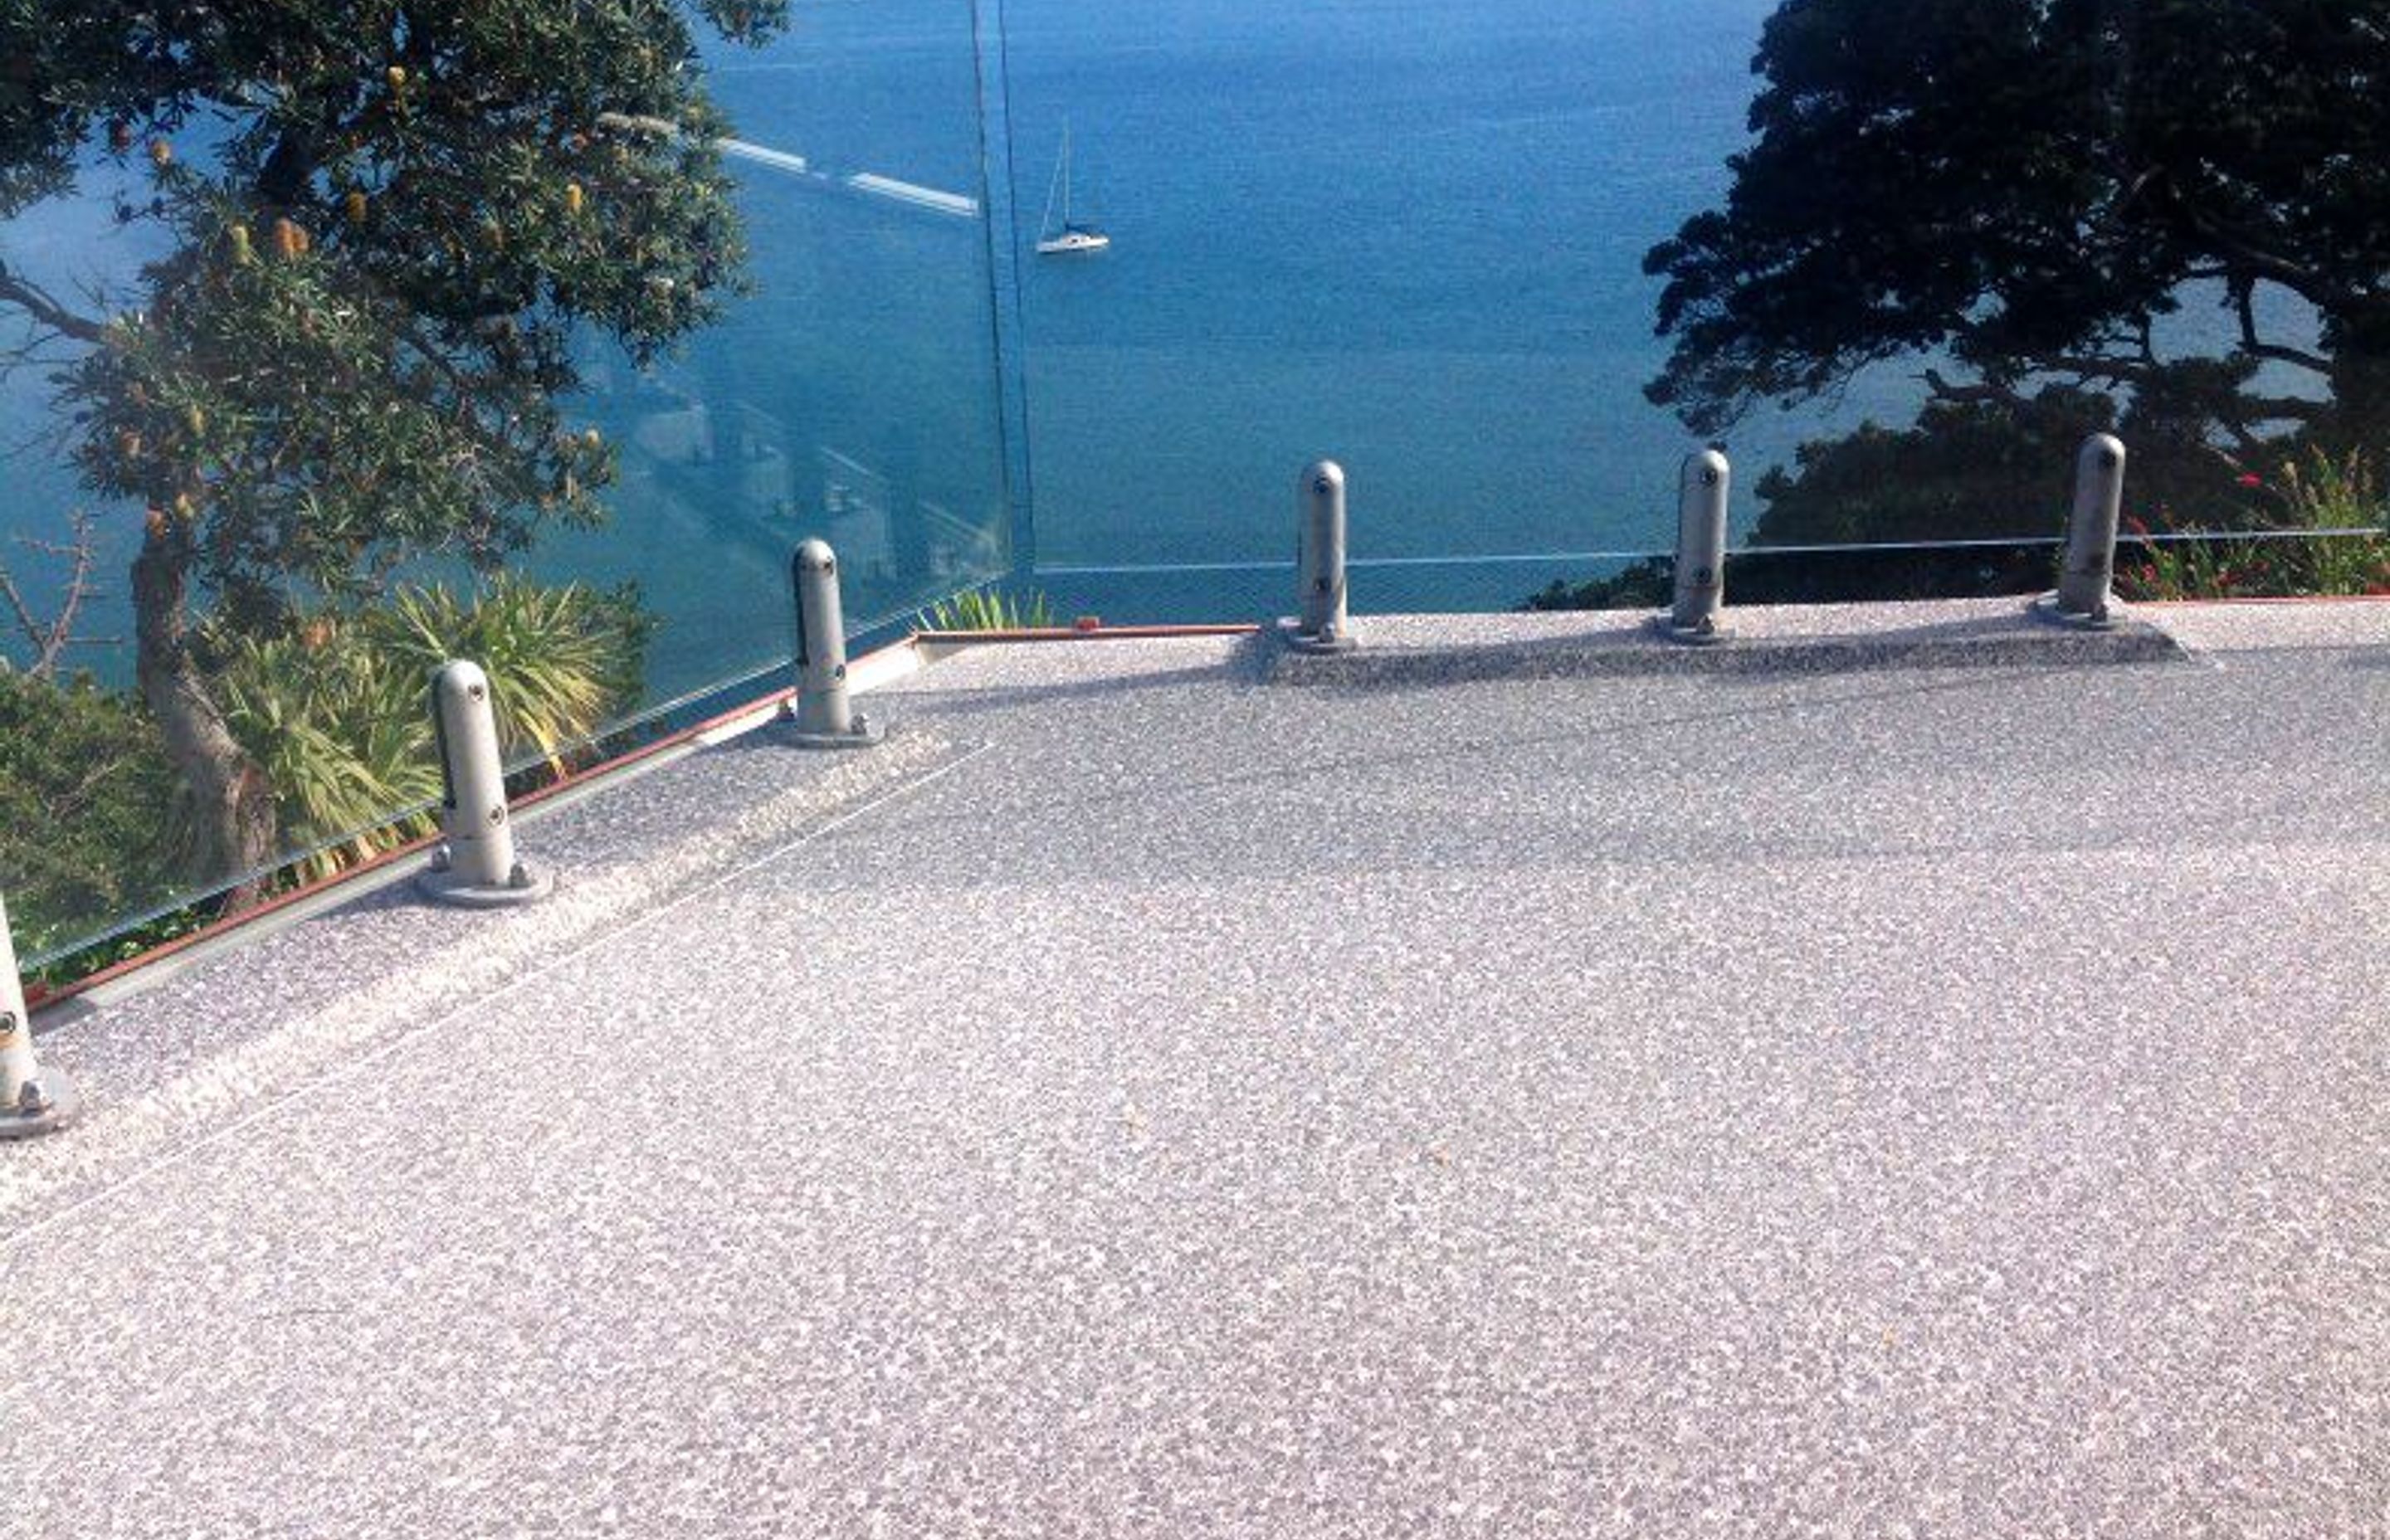 From yachts to balconies: a maritime-inspired decking solution